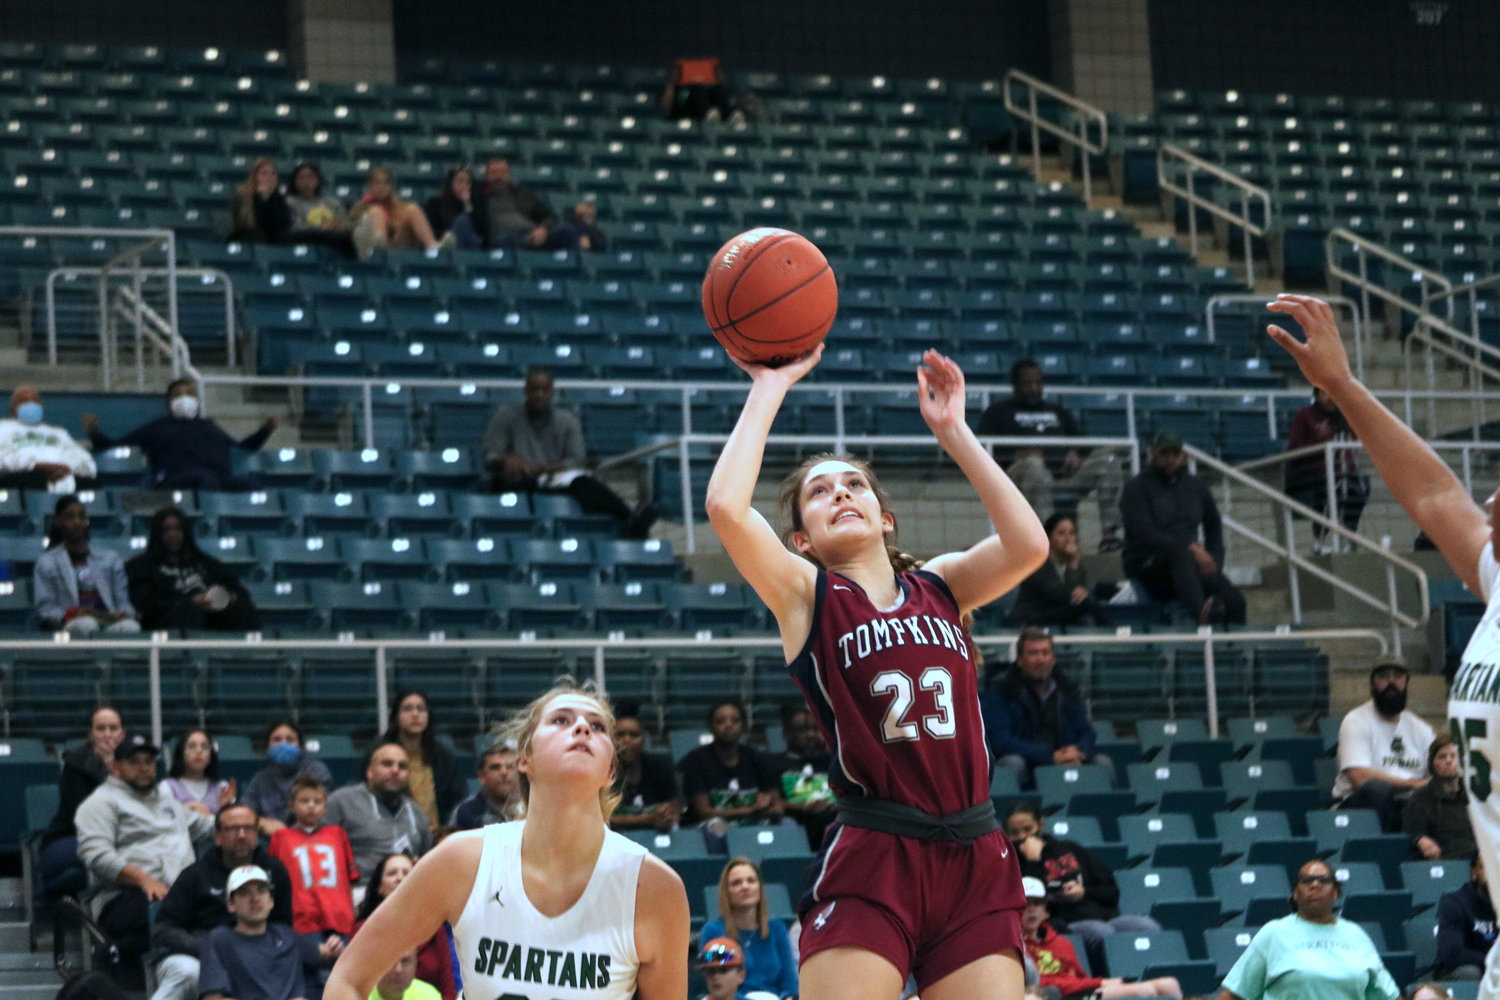 Bella Riggin shoots a layup during Friday’s game between Tompkins and Stratford at the Merrell Center.